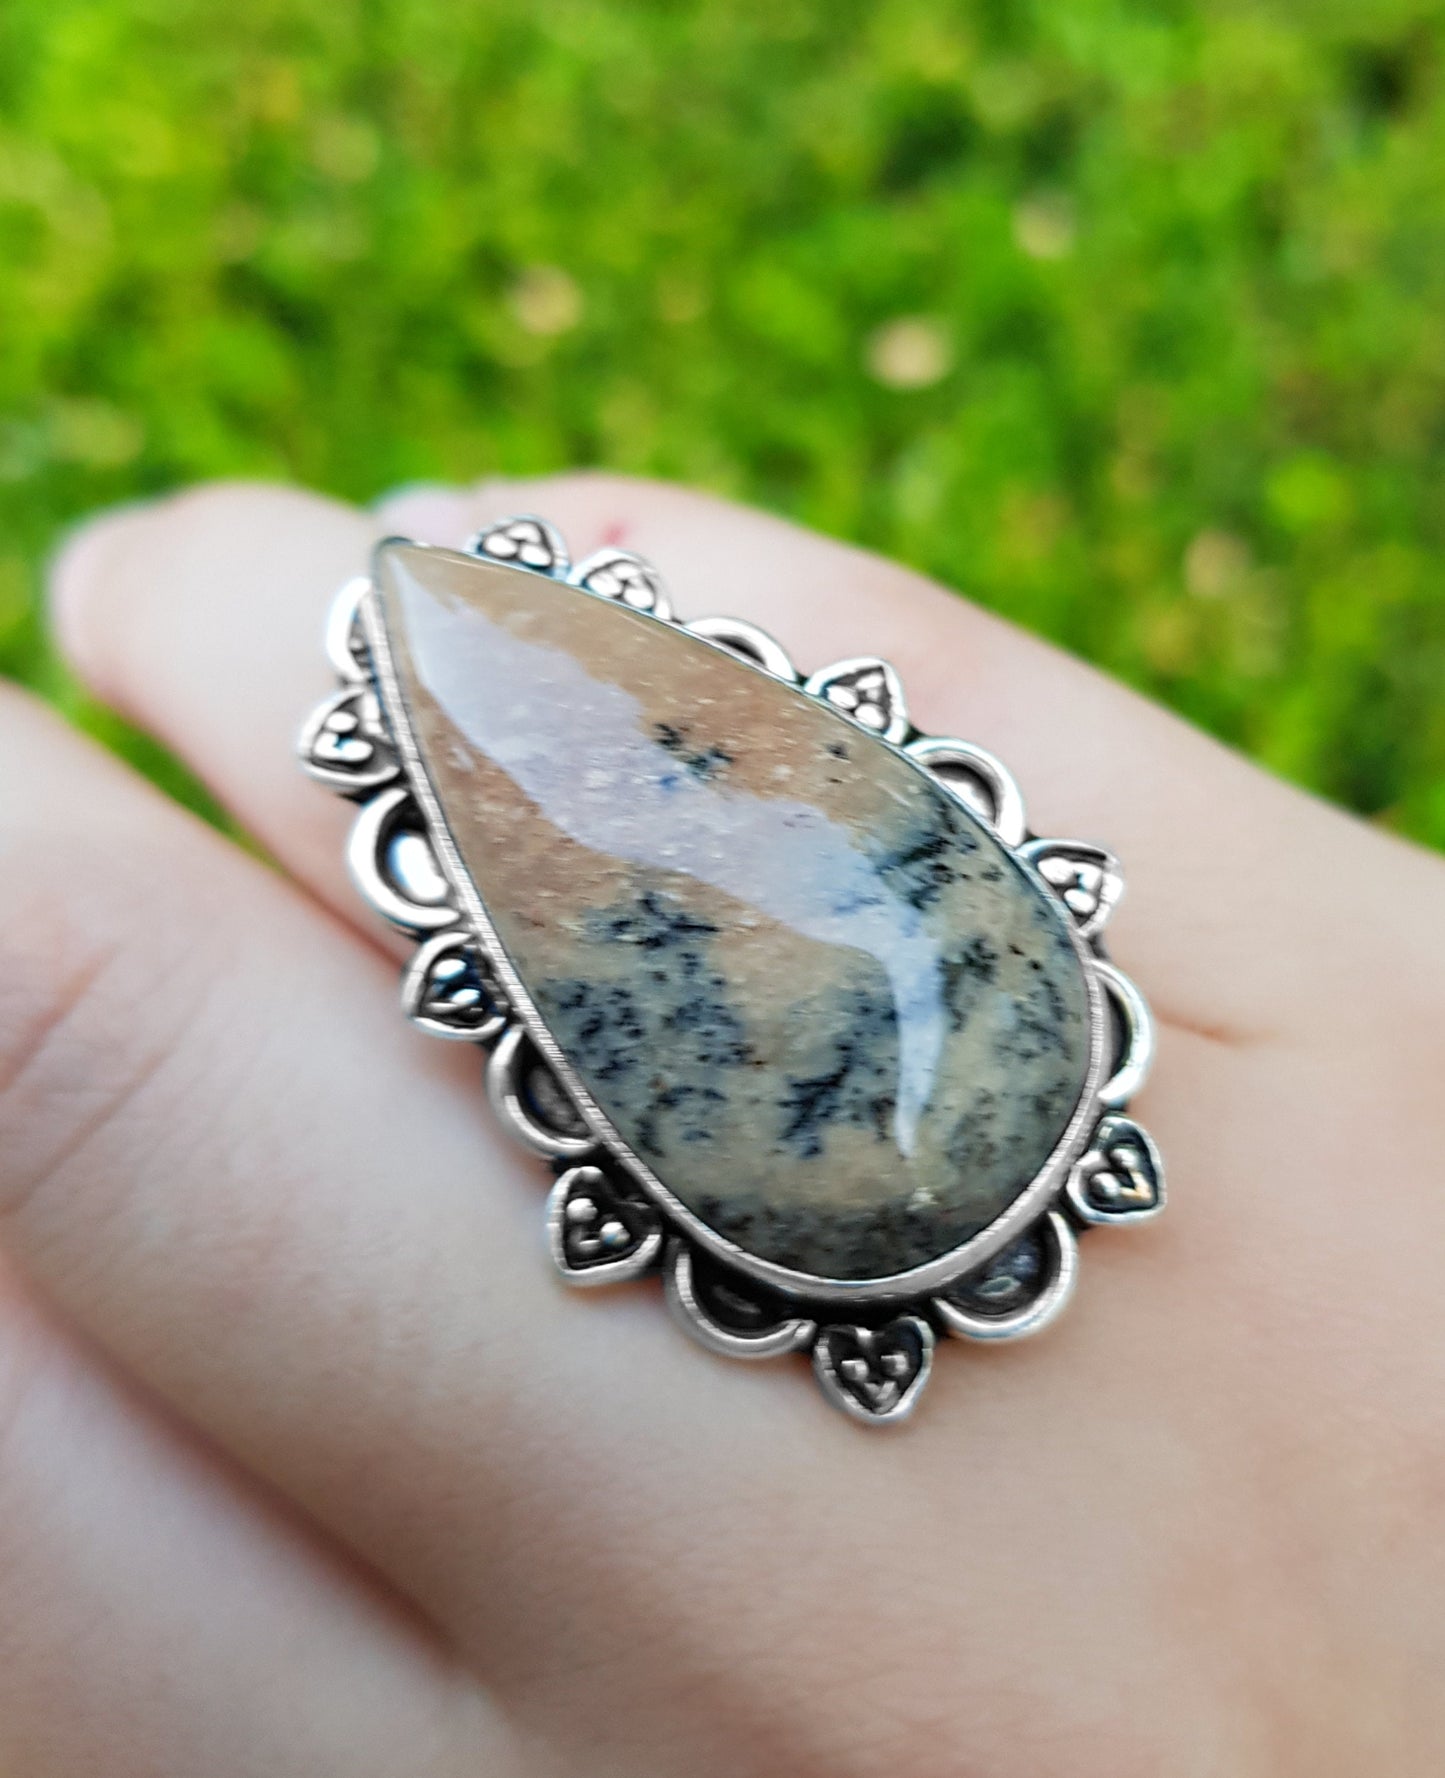 Kambaba Jasper Ring In Sterling Silver Statement Ring Size US 6 3/4 One Of A Kind Jewelry